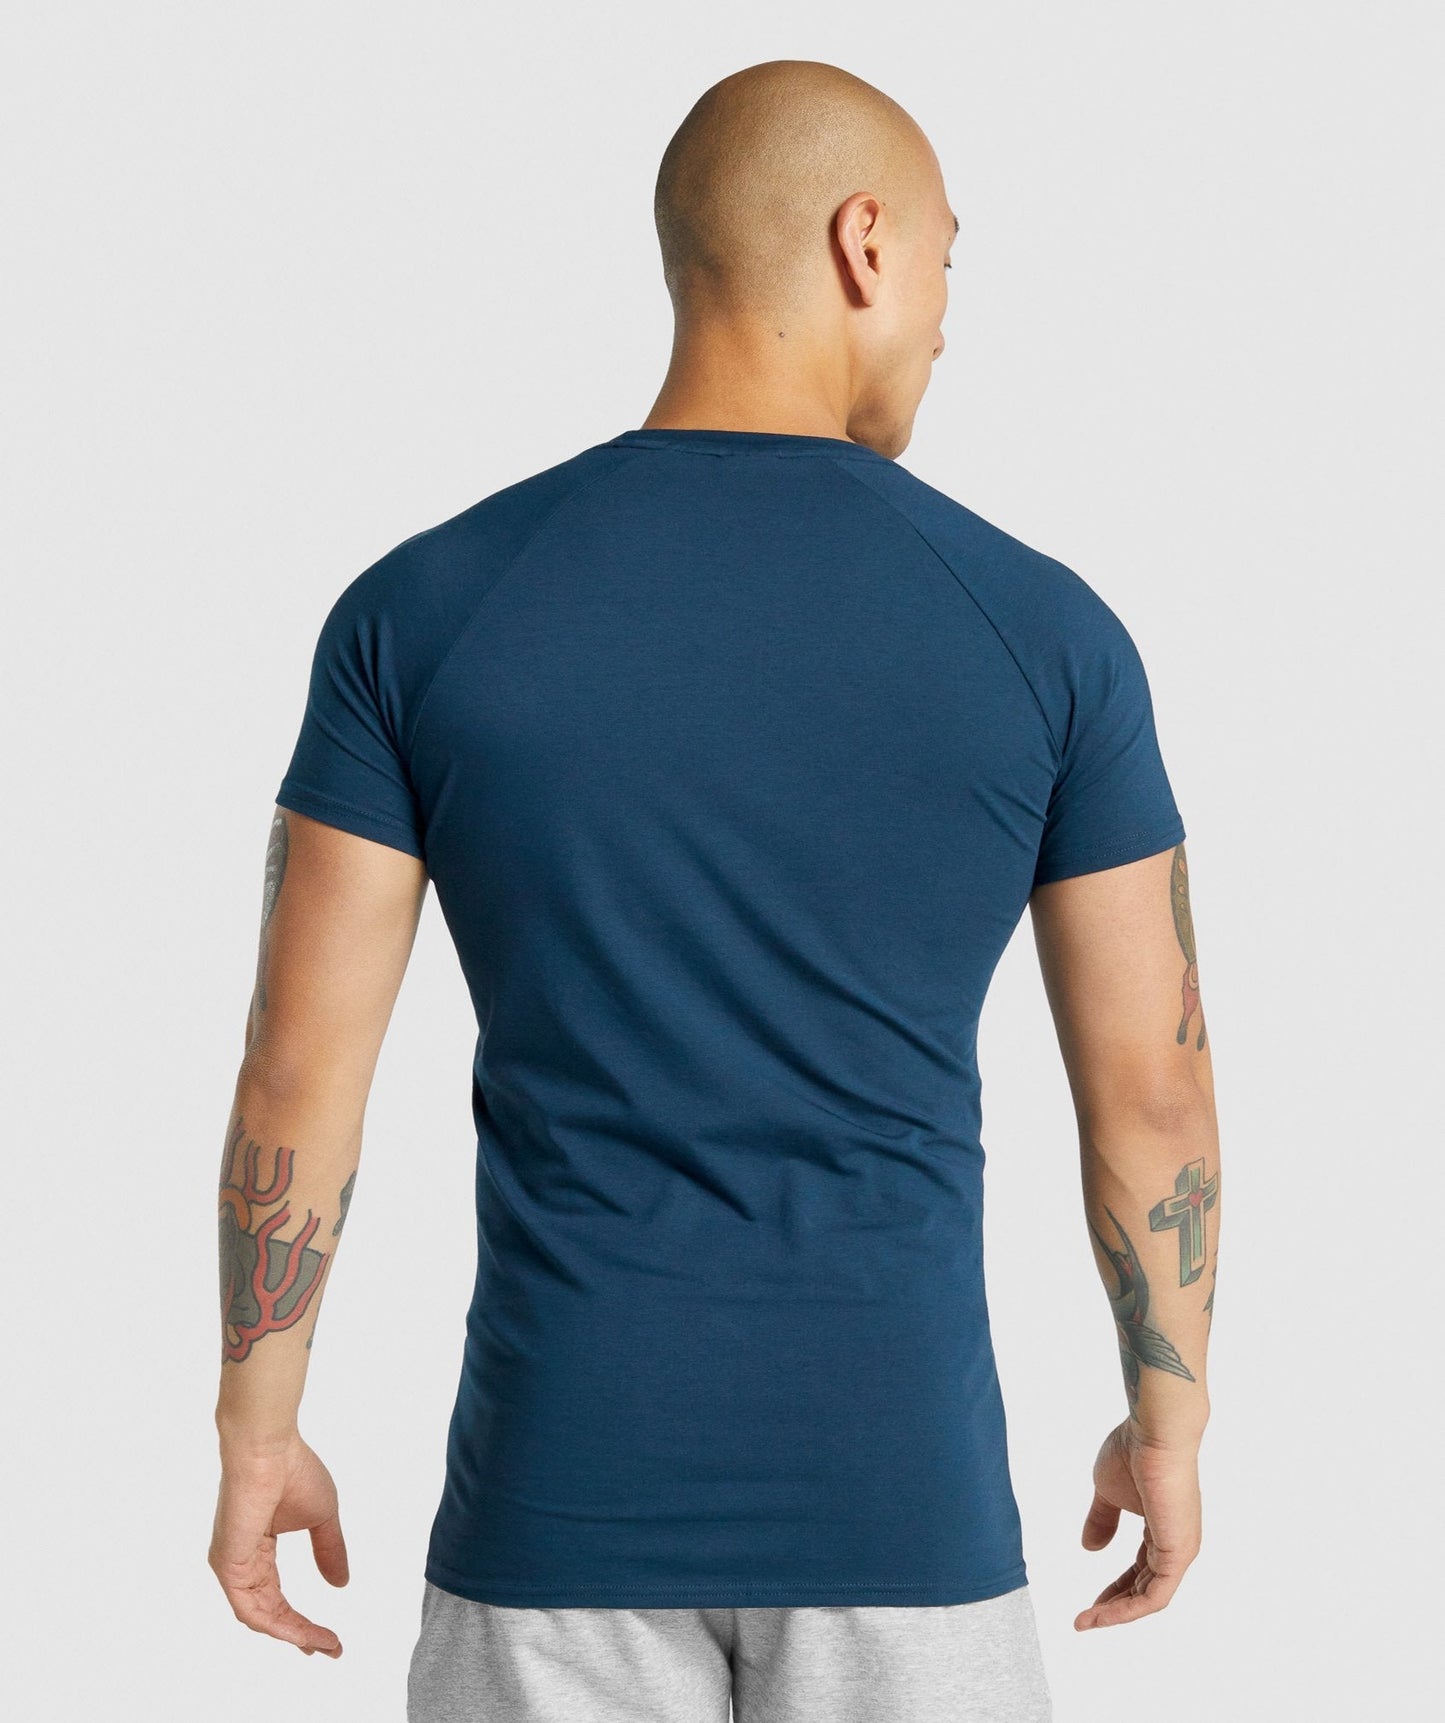 Gymshark Critical 2.0 T-Shirt - Navy – Client 446 100K products